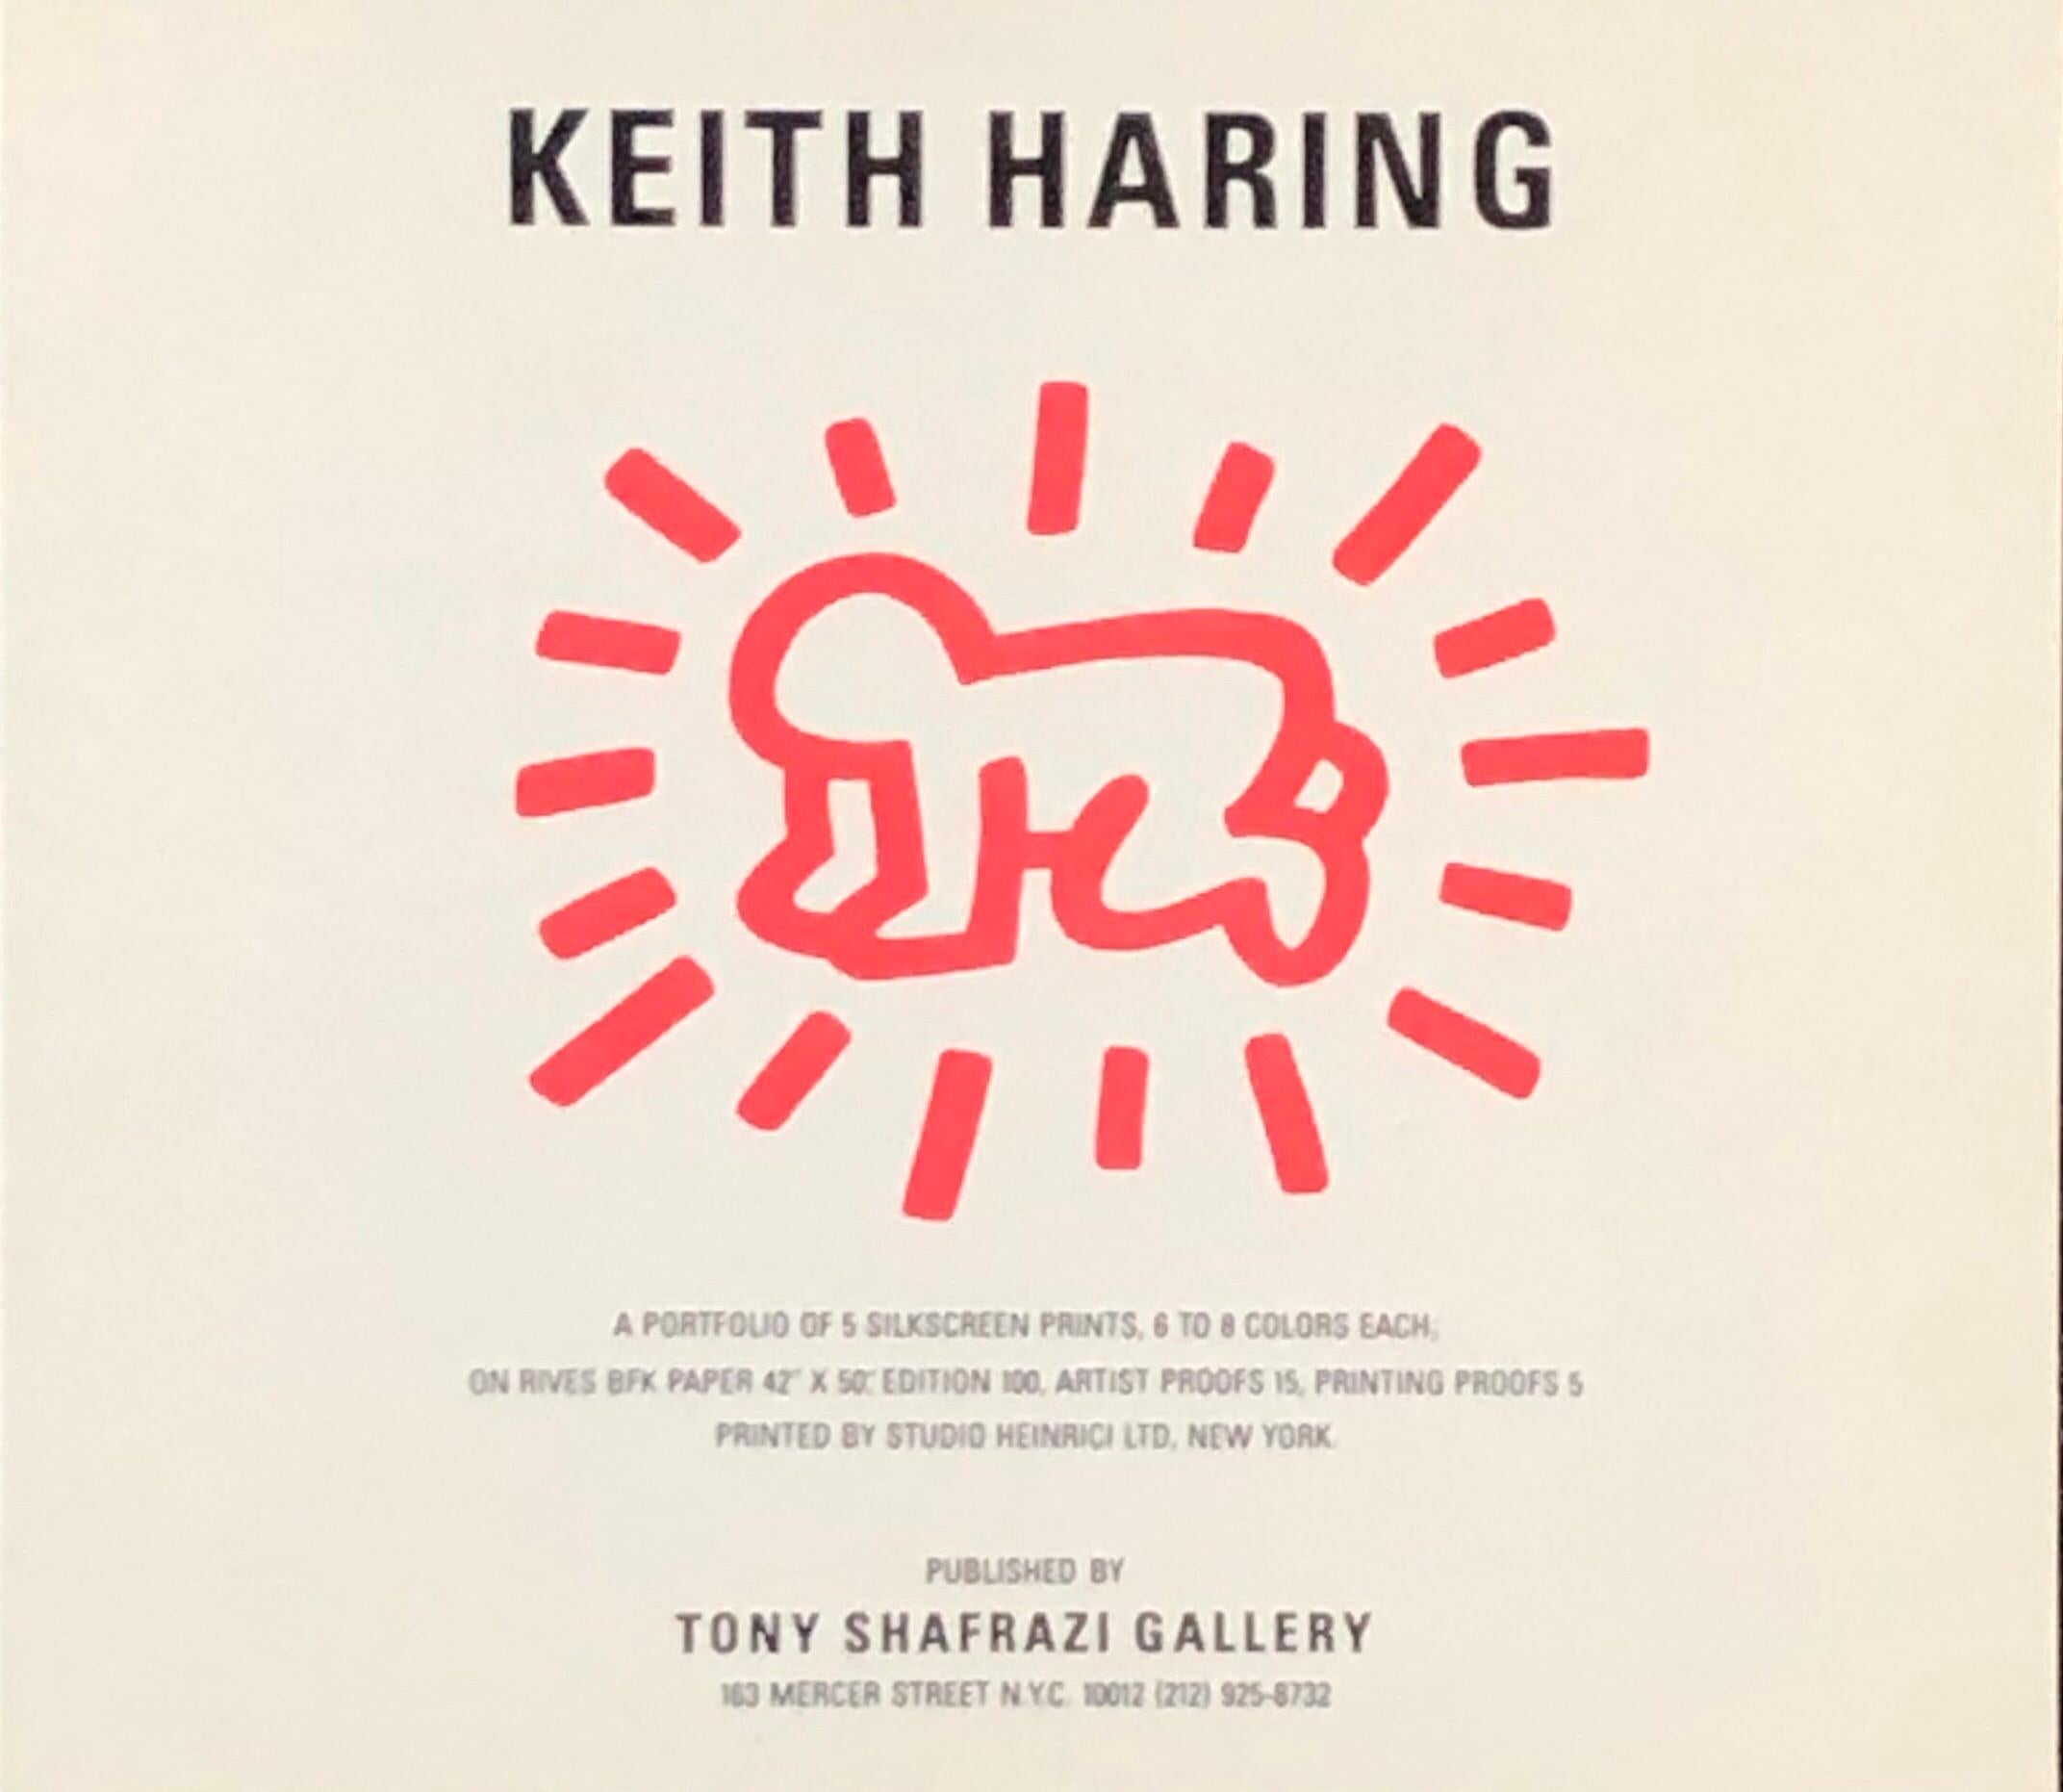 Keith Haring Fertility: set of 5 announcements 1983 (Keith Haring Tony Shafrazi) For Sale 9